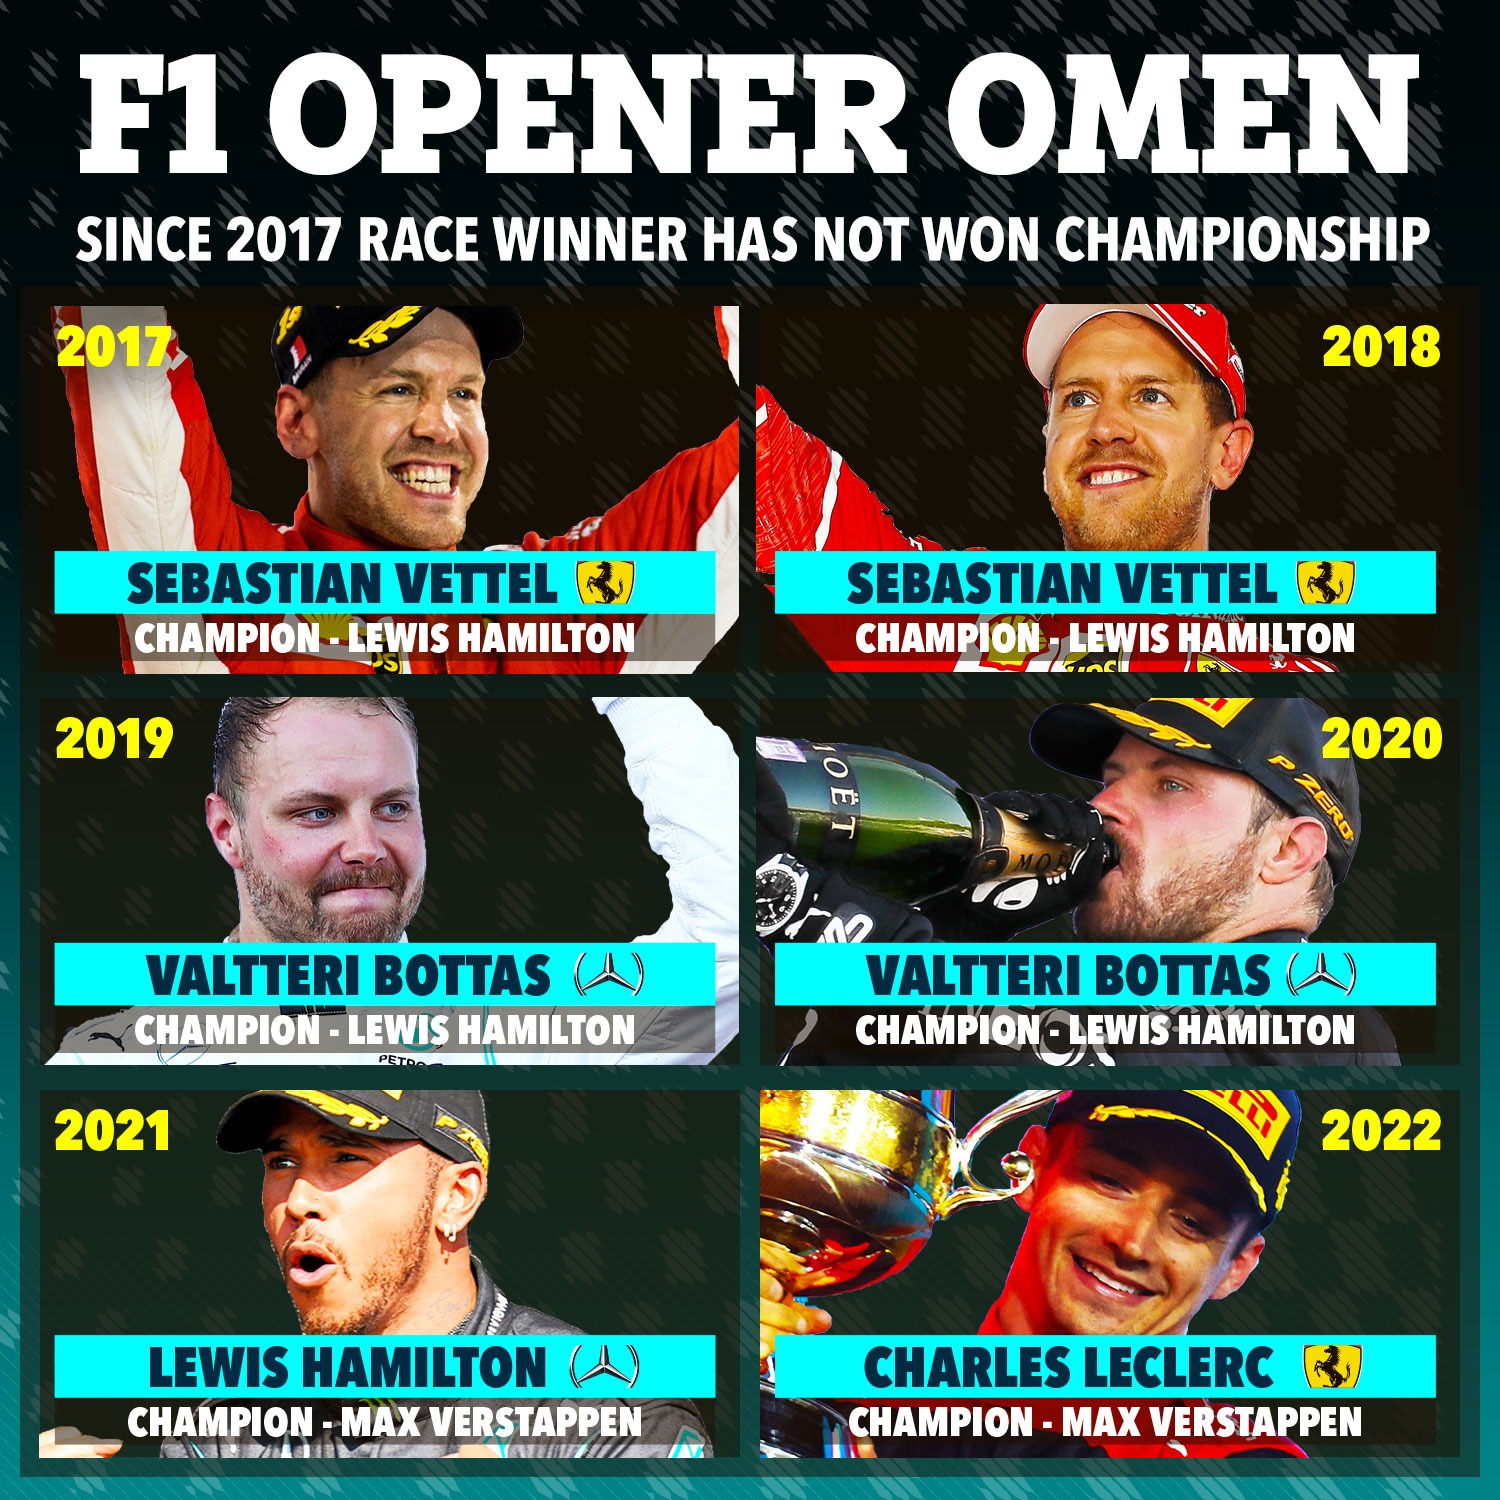 , Incredible omen suggests Lewis Hamilton may yet win F1 title after Max Verstappen storms to victory in Bahrain opener